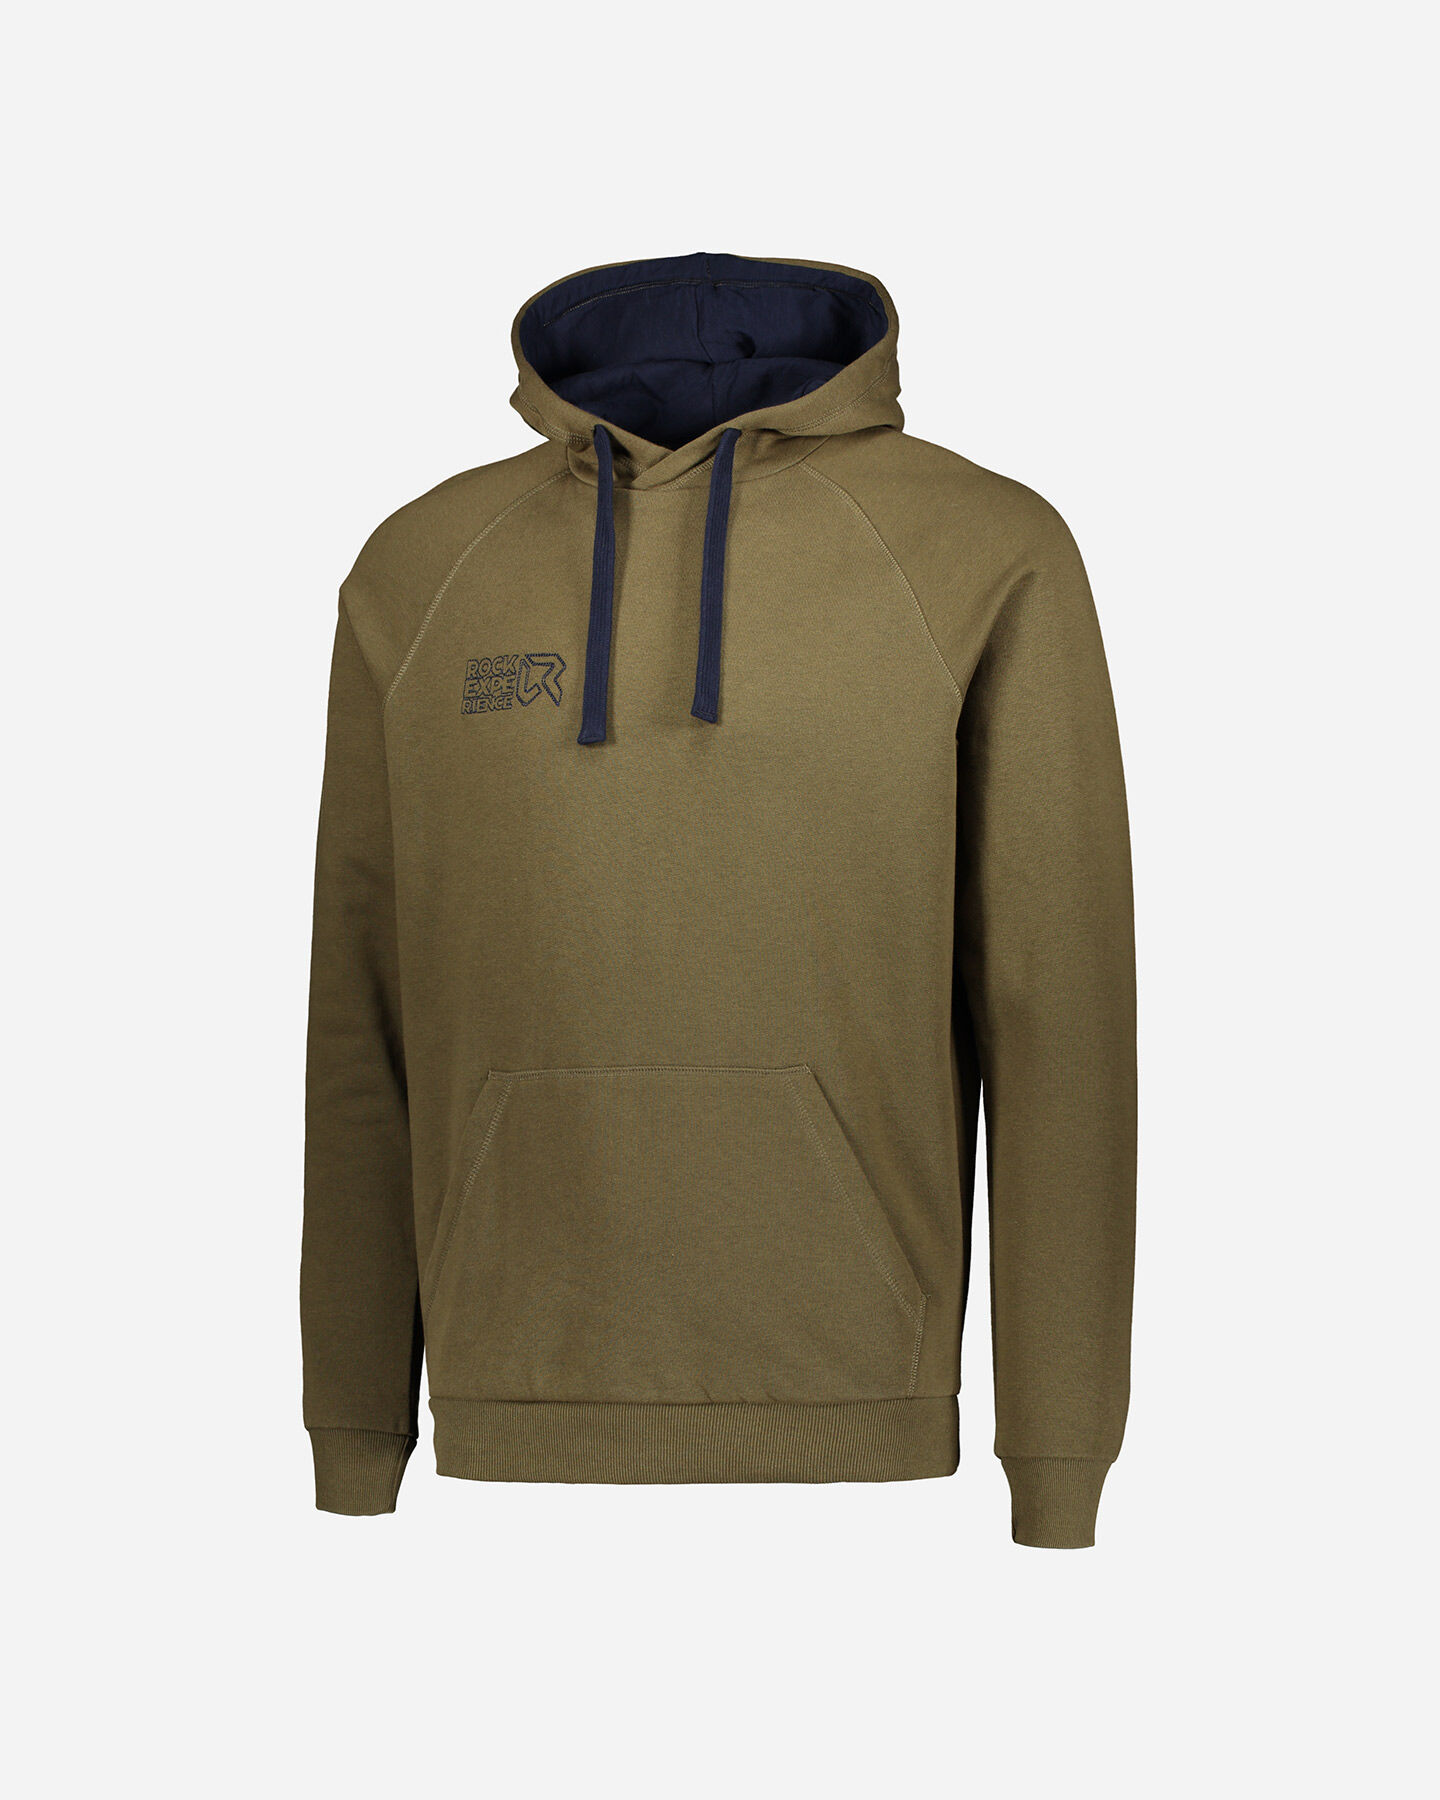  Felpa ROCK EXPERIENCE HOODIE COMPLEX M S4095875|1924|S scatto 0